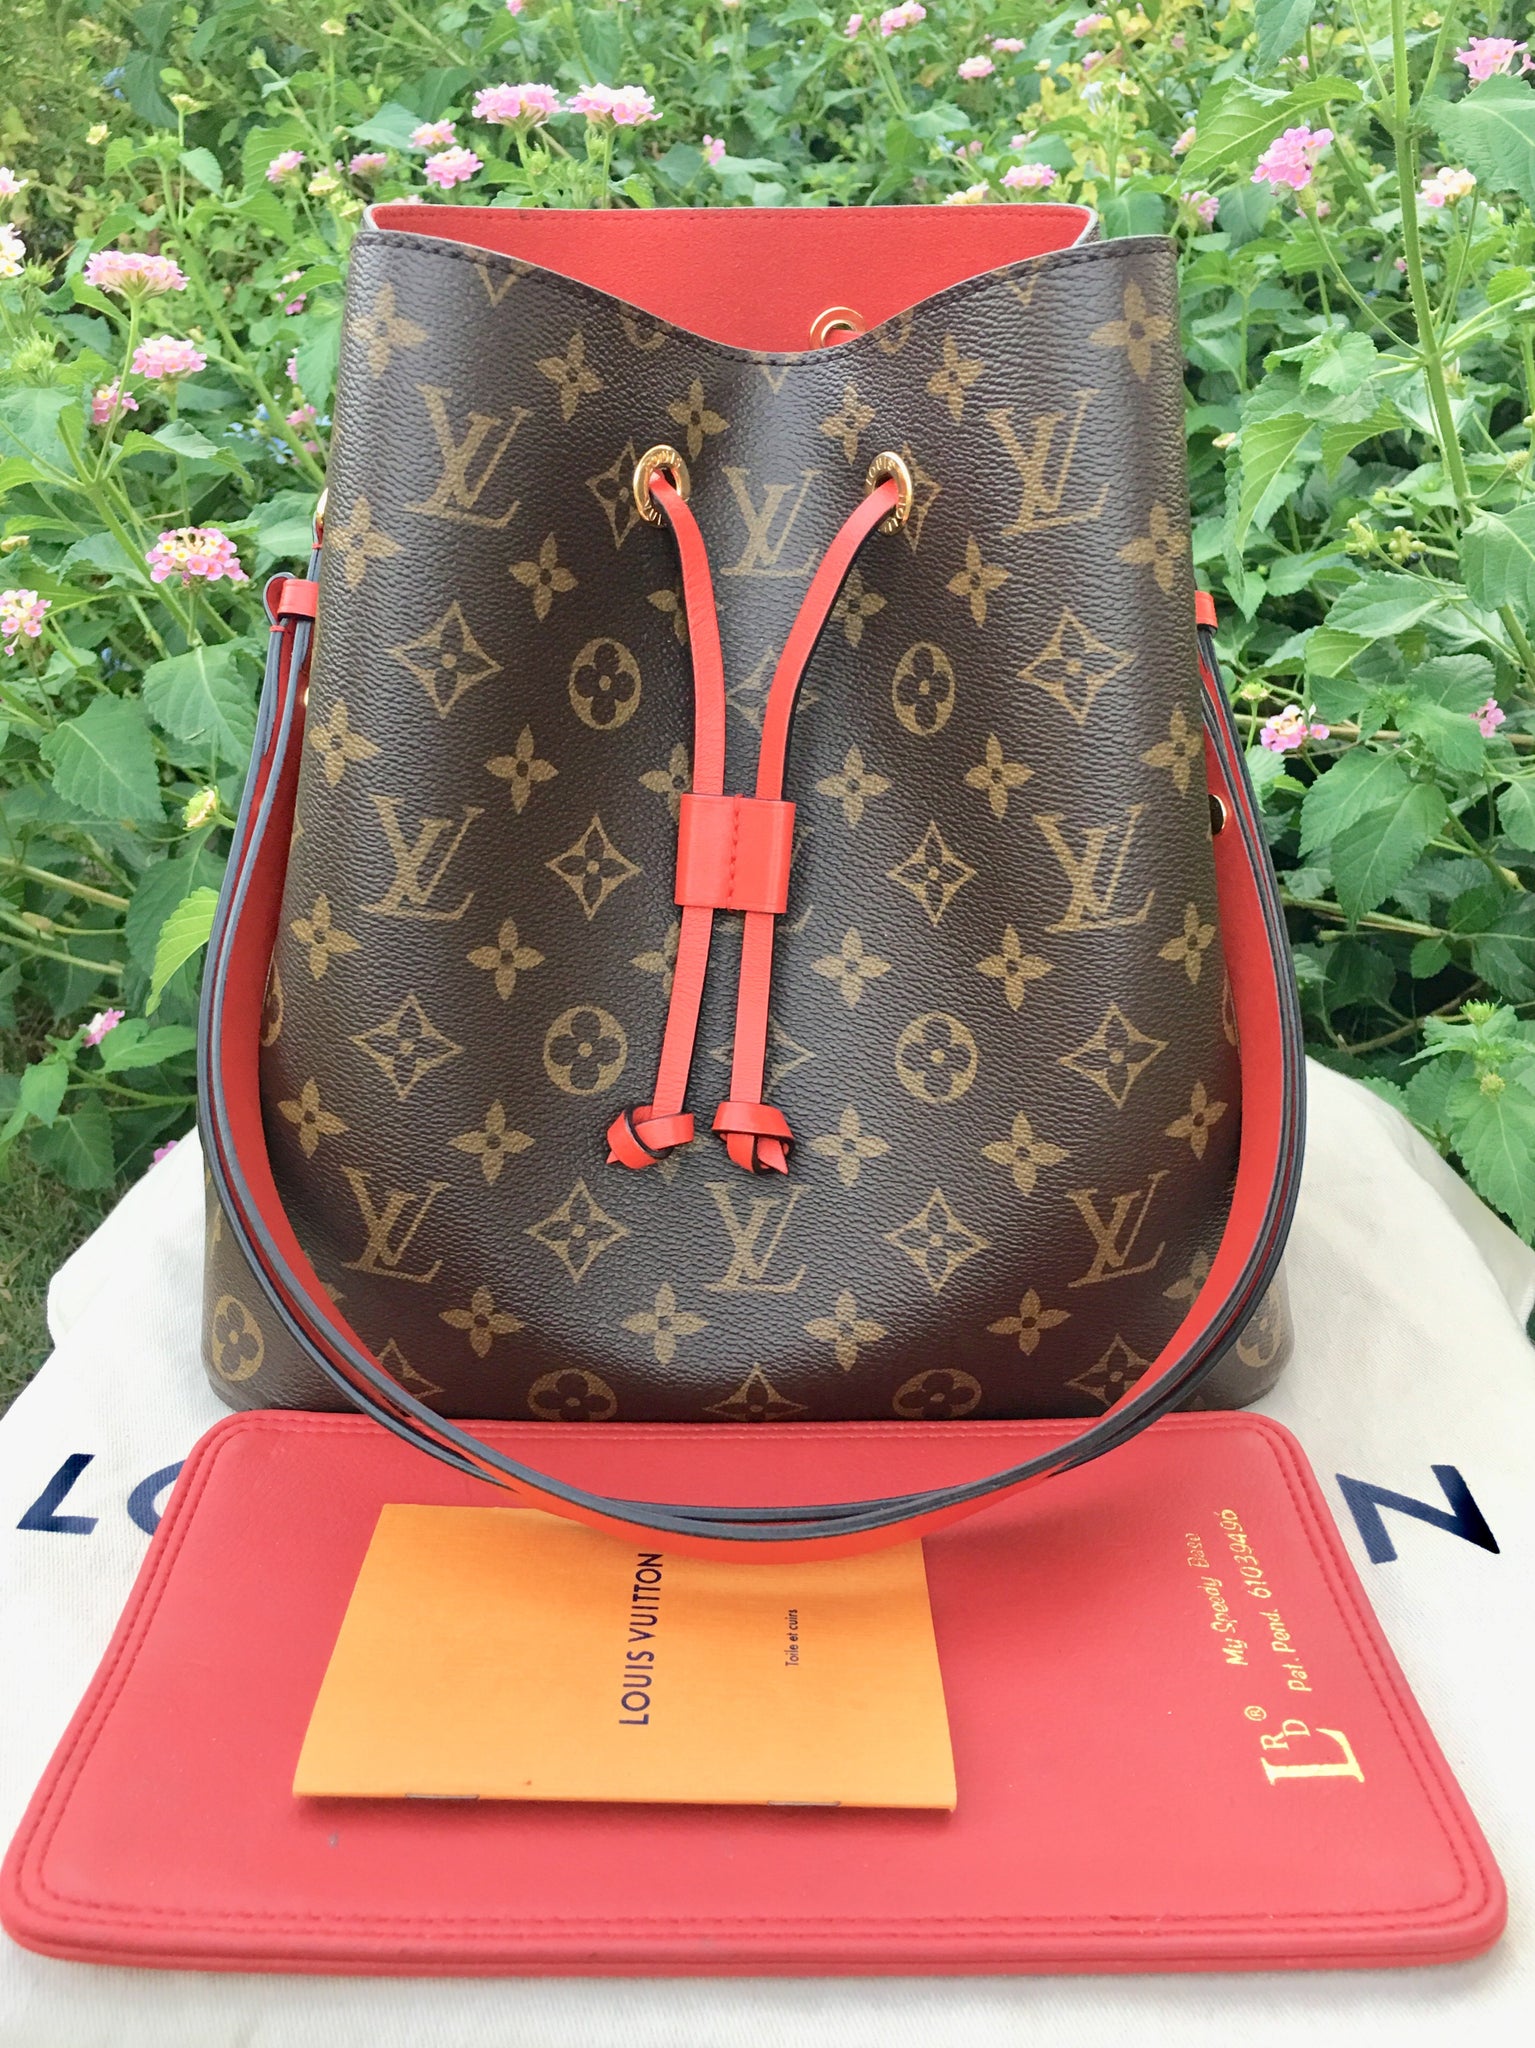 Authentic LV neonoe bucket bag available. Its coded Swipe for details.  Price 2200